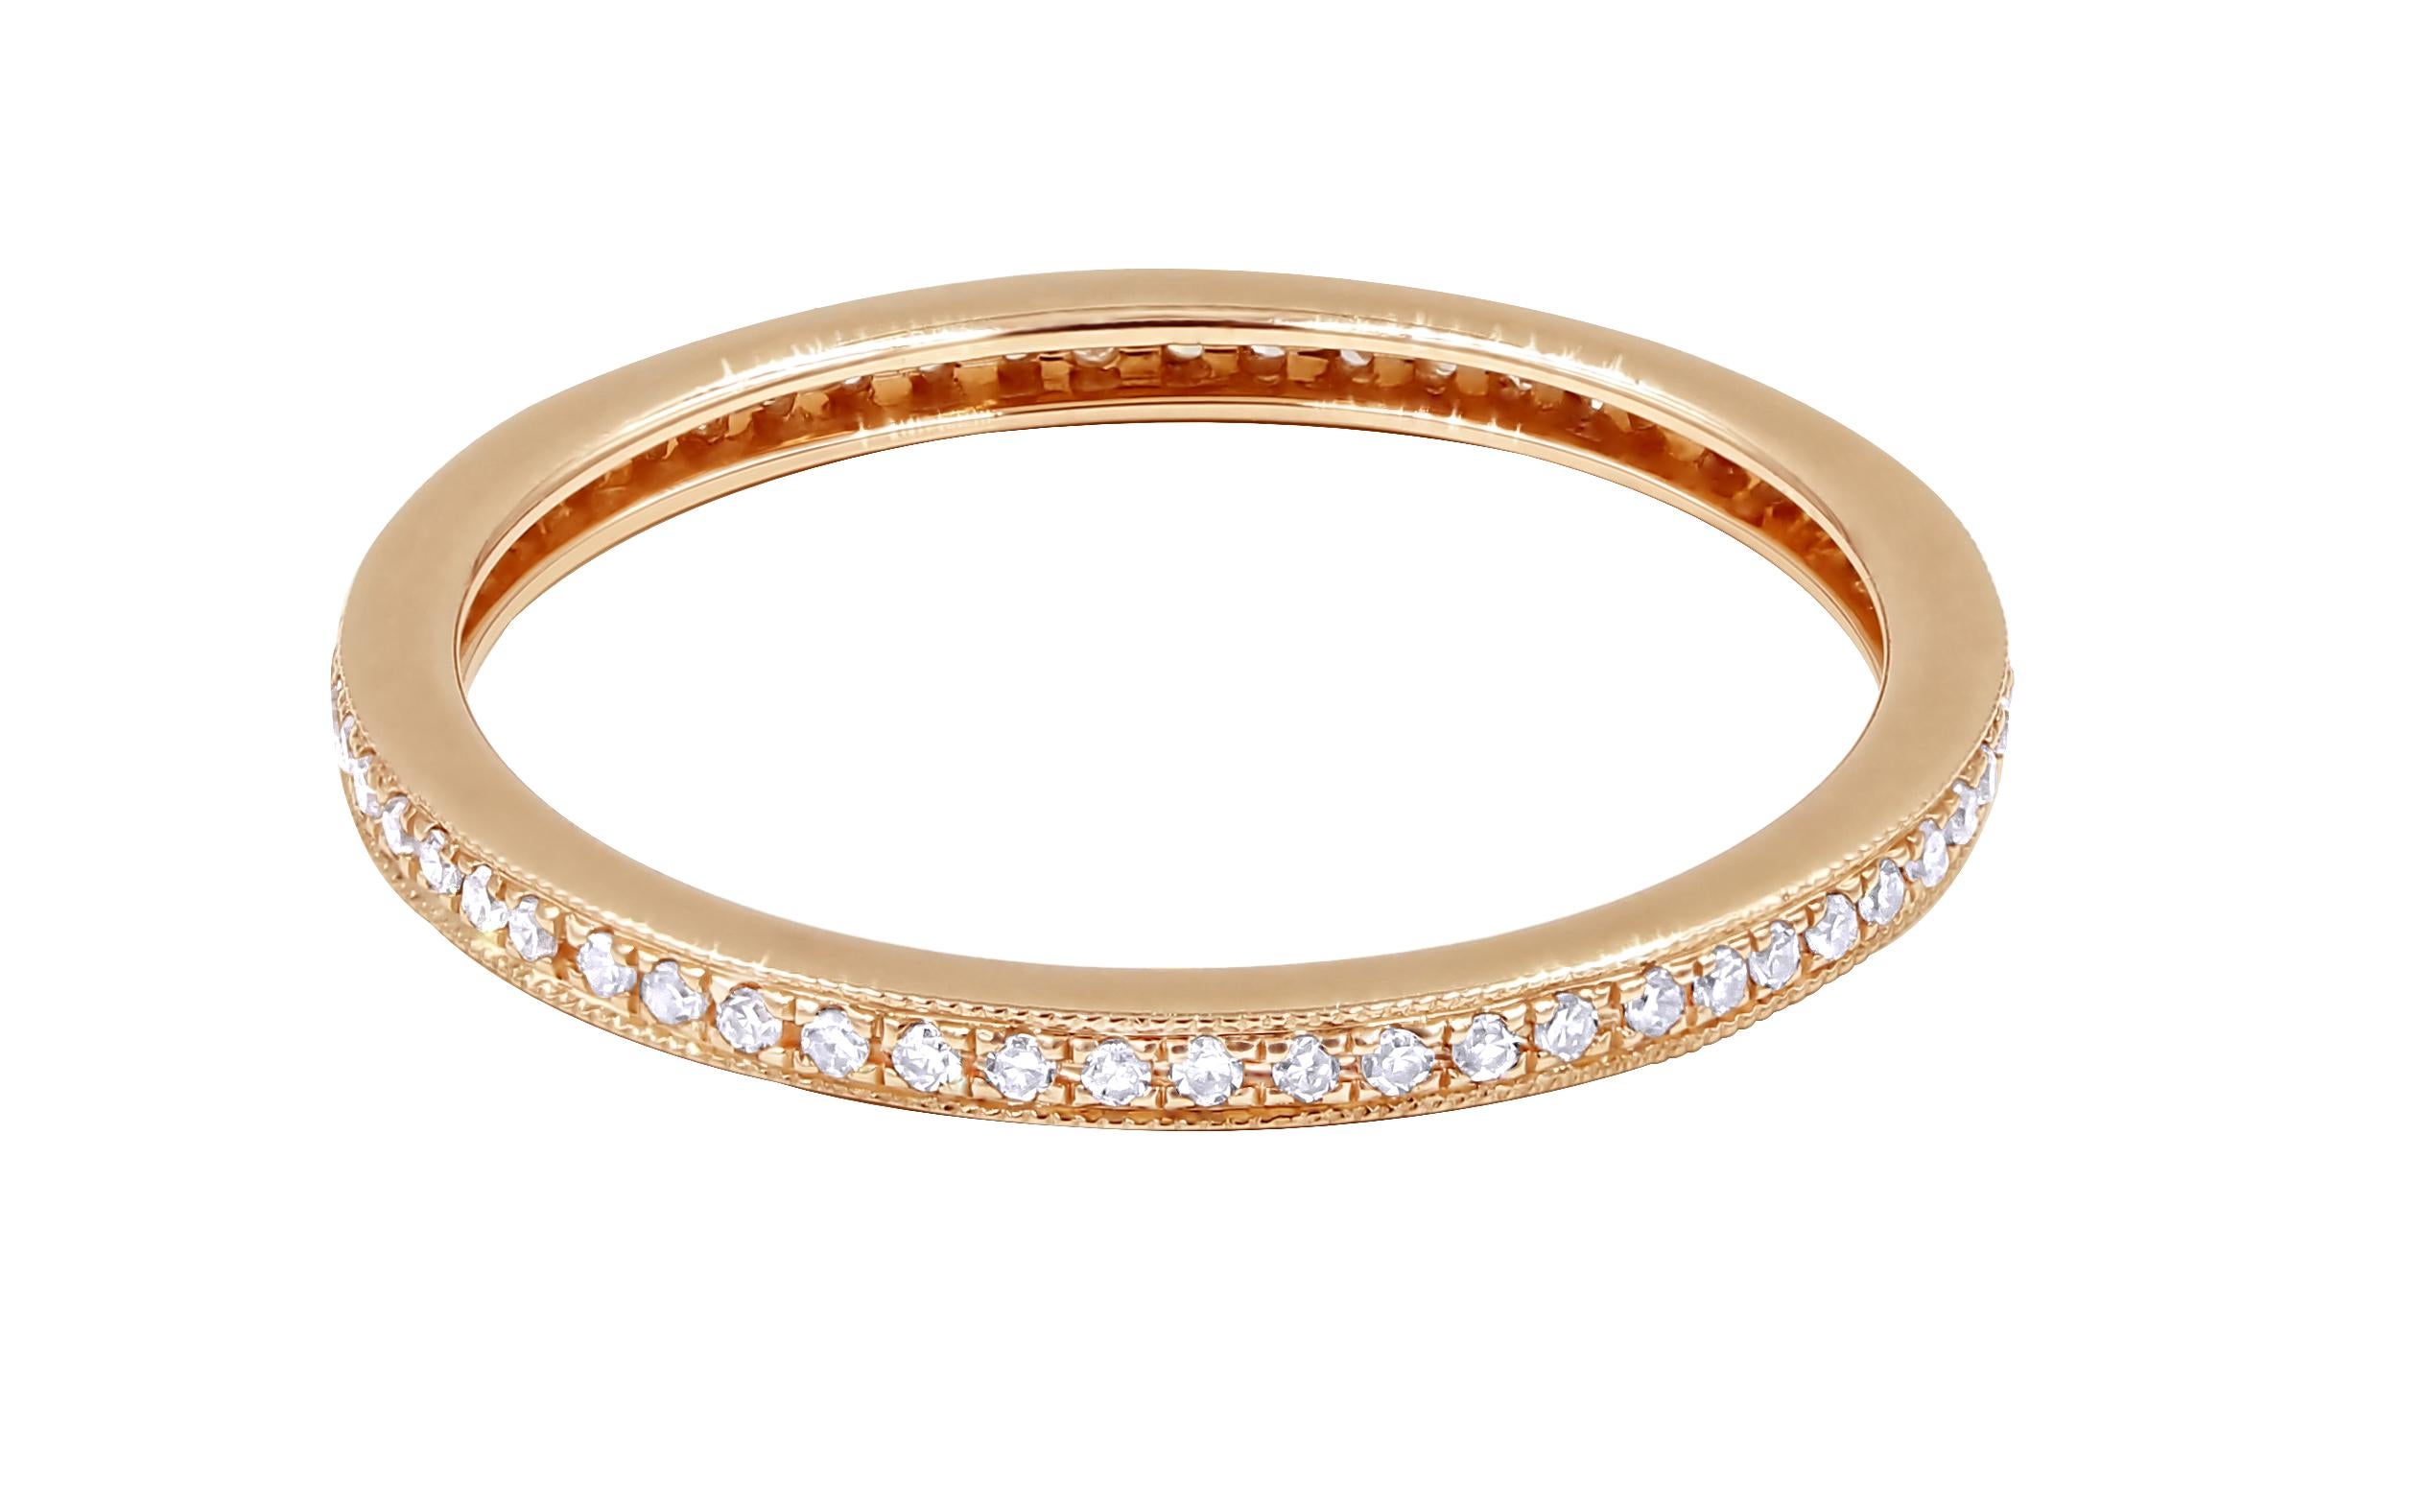 Ladies beautiful diamond wedding band.
.38 carat total weight of round brilliant cut diamonds.
Carefully handcrafted in 14k rose gold.
We are always interested in your best offer.
Please contact us with any question
Size 7.